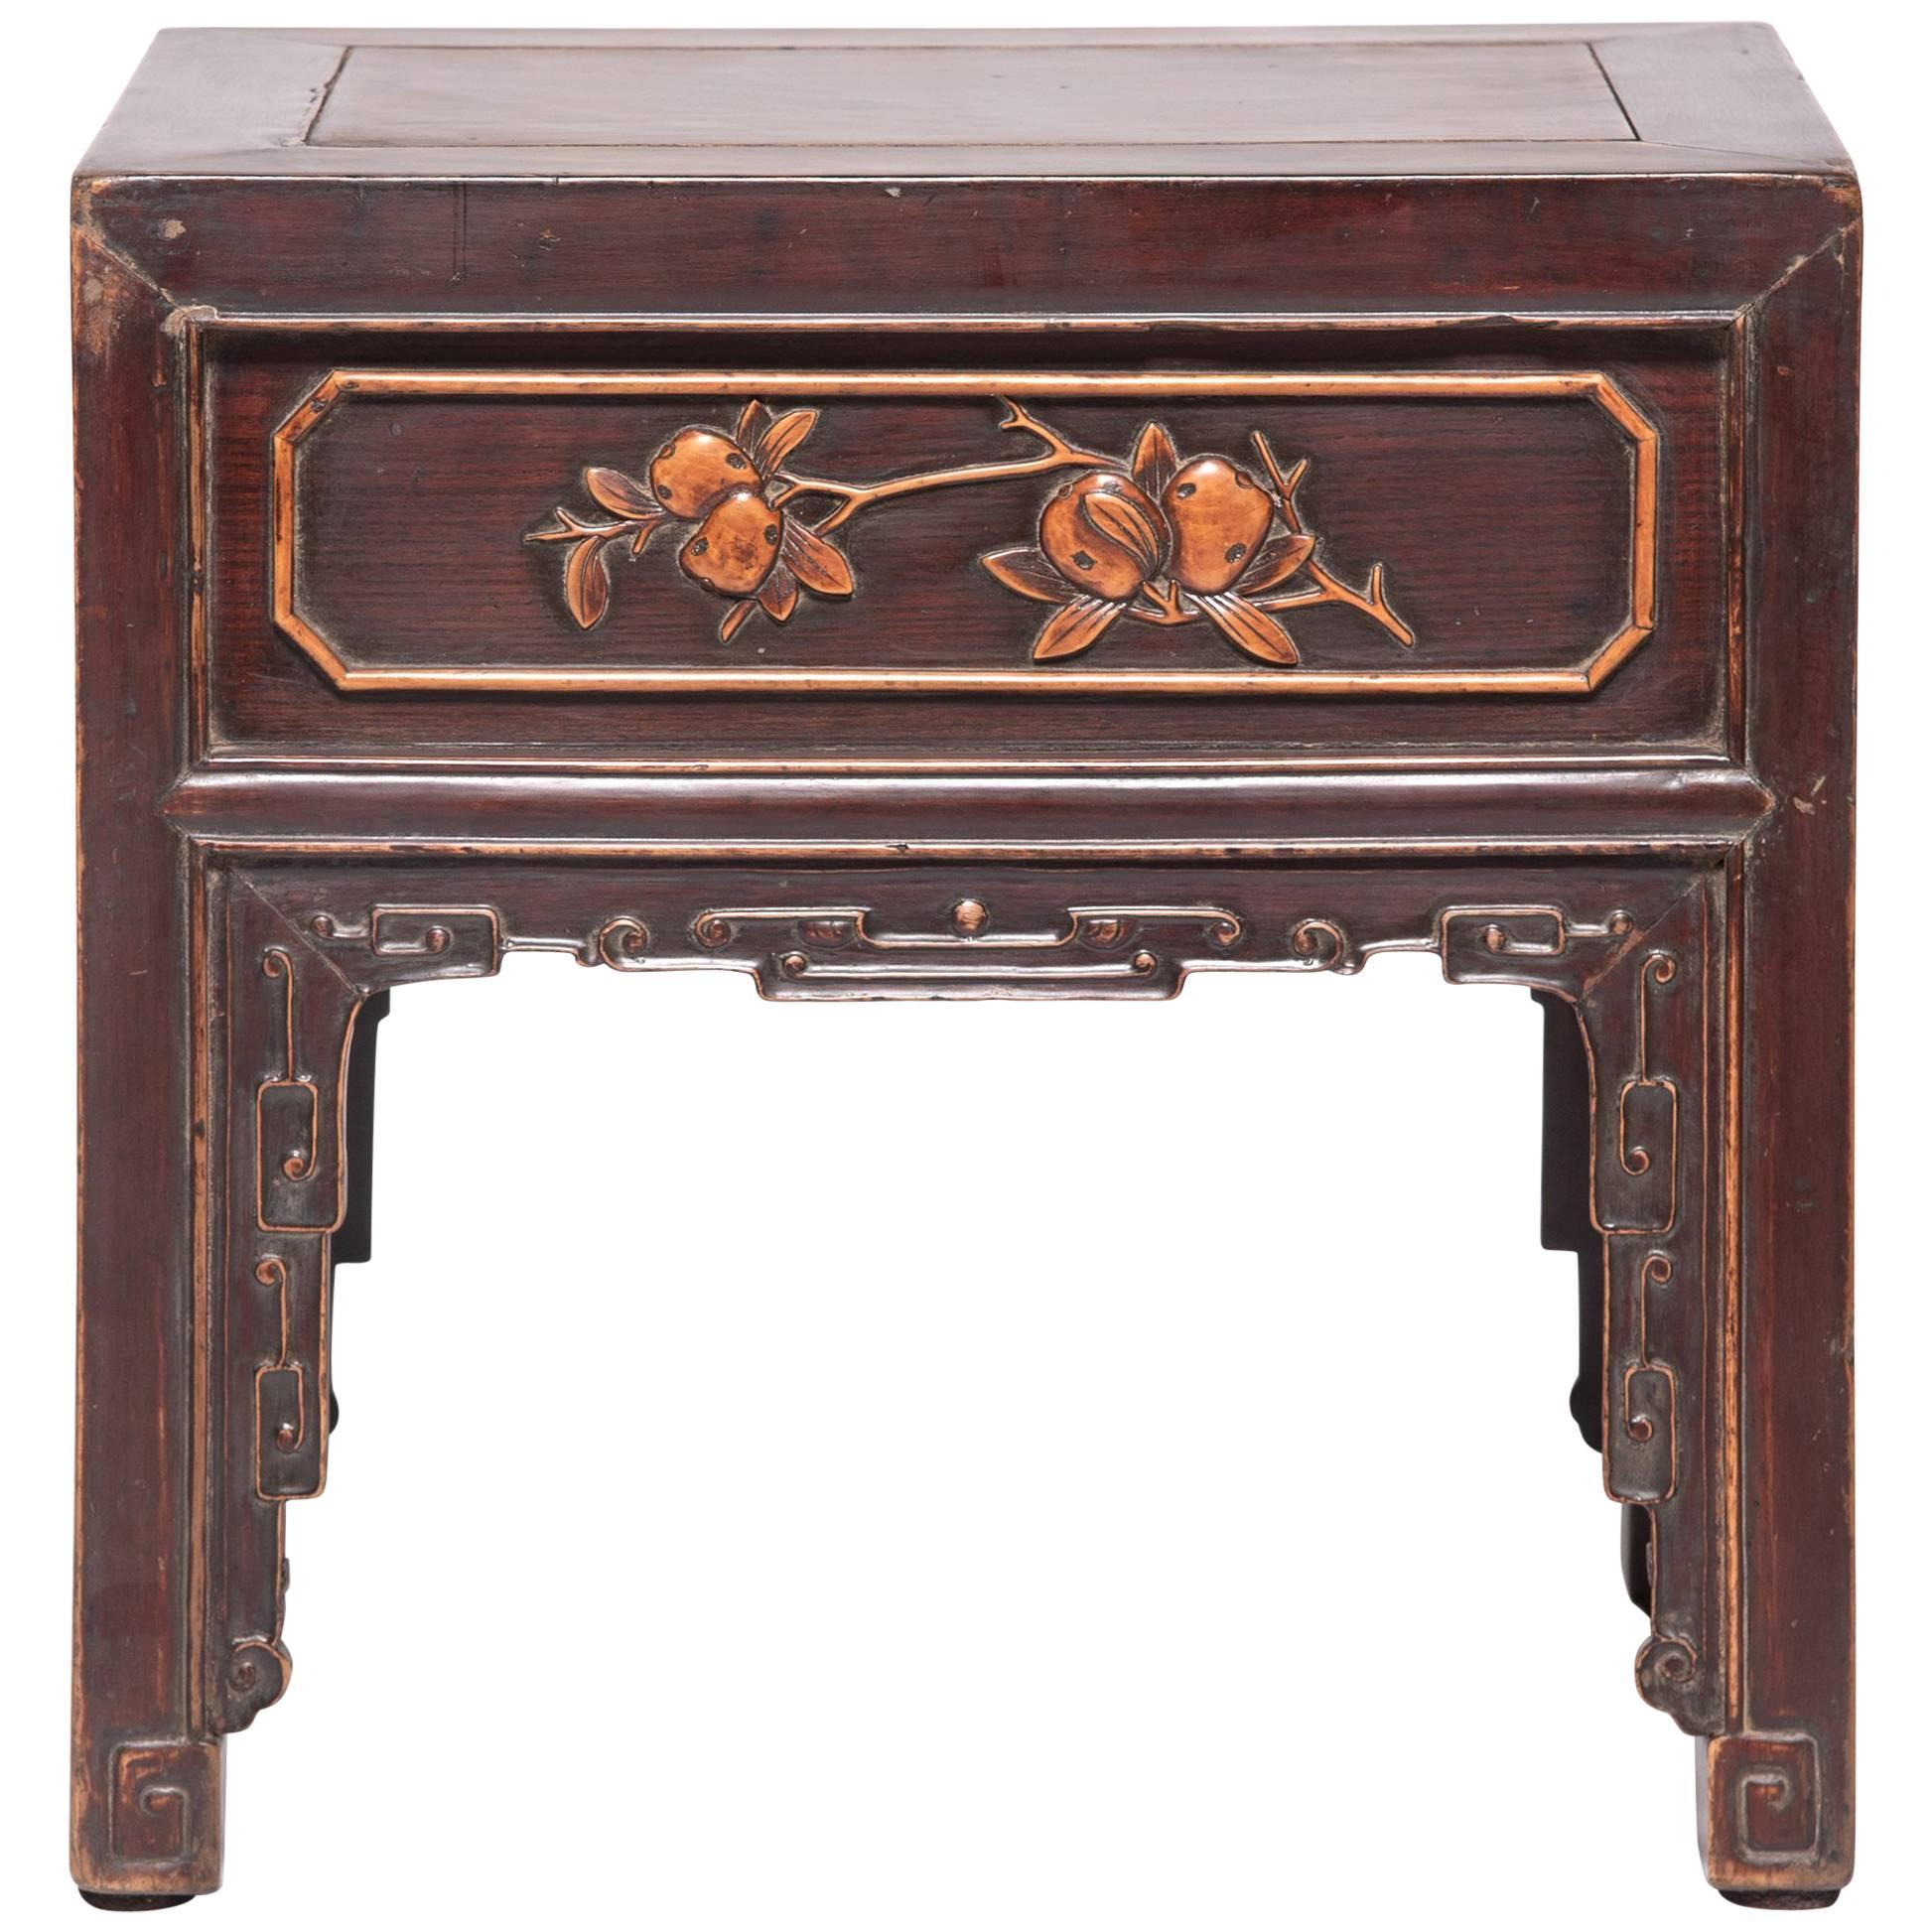 Petite Chinese Display Table with Boxwood Inlay, c. 1850